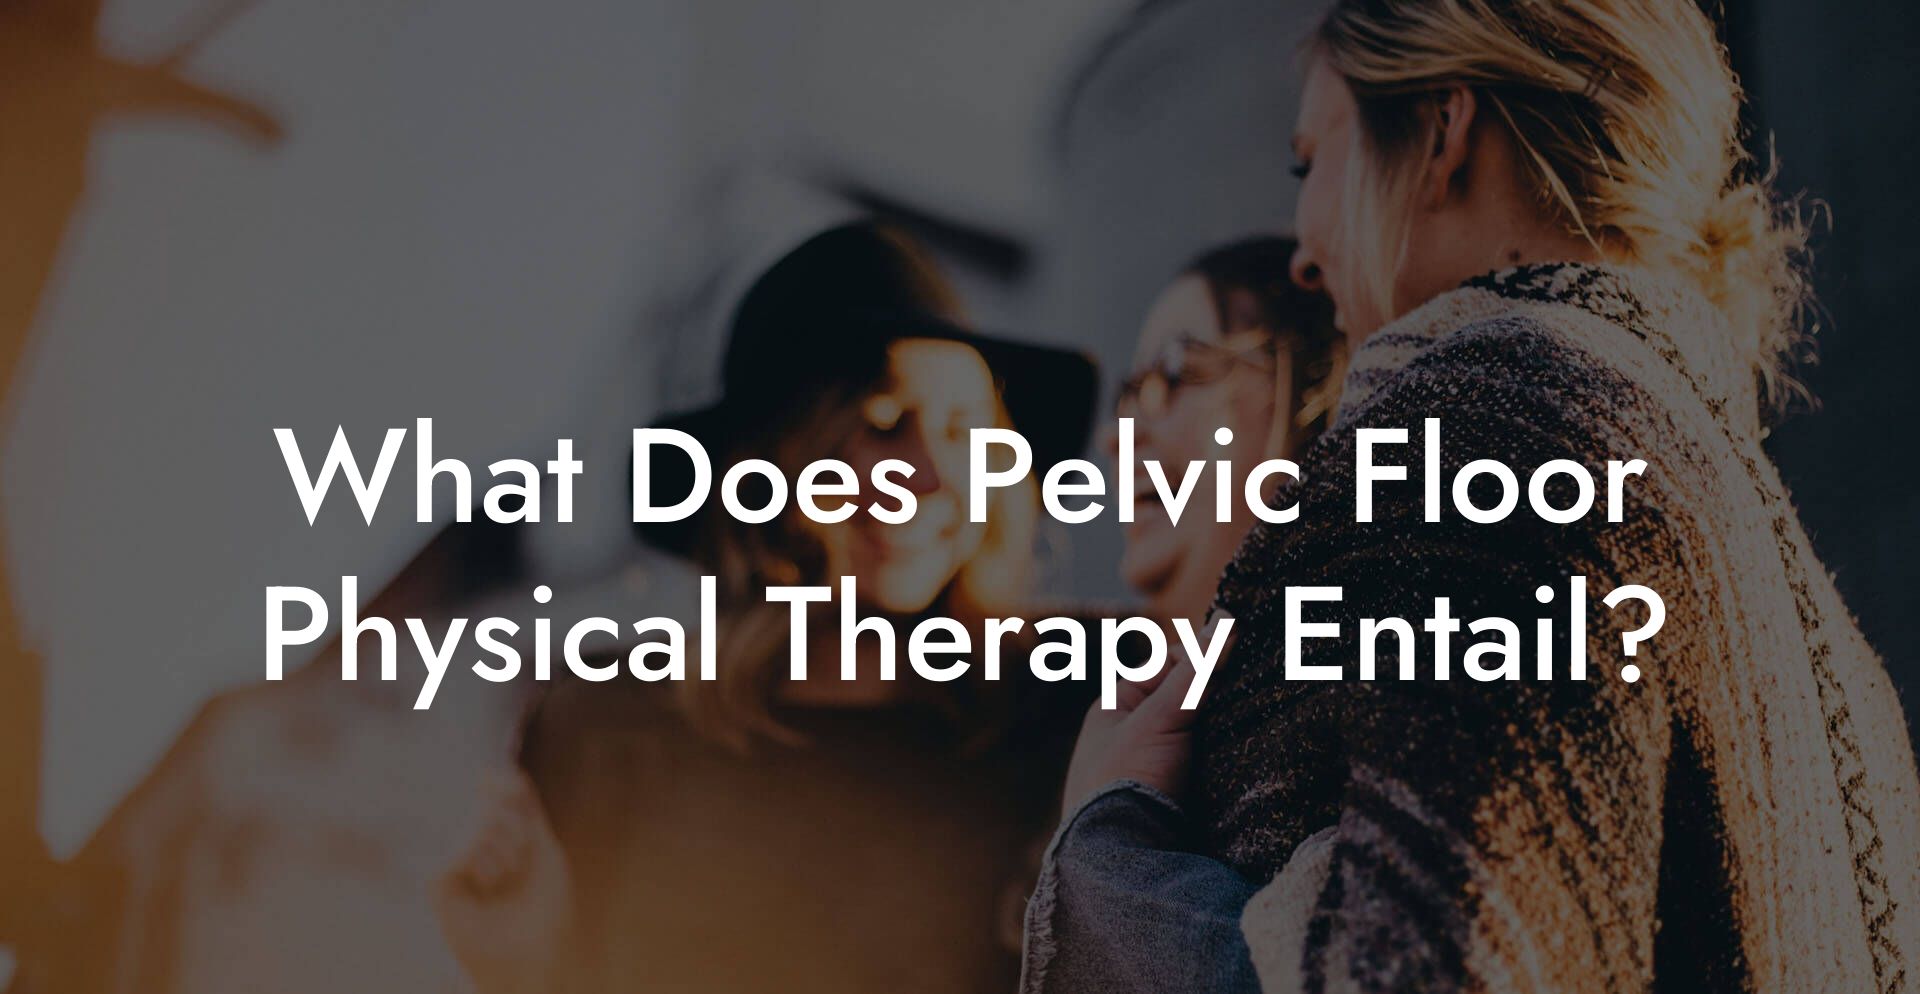 What Does Pelvic Floor Physical Therapy Entail?